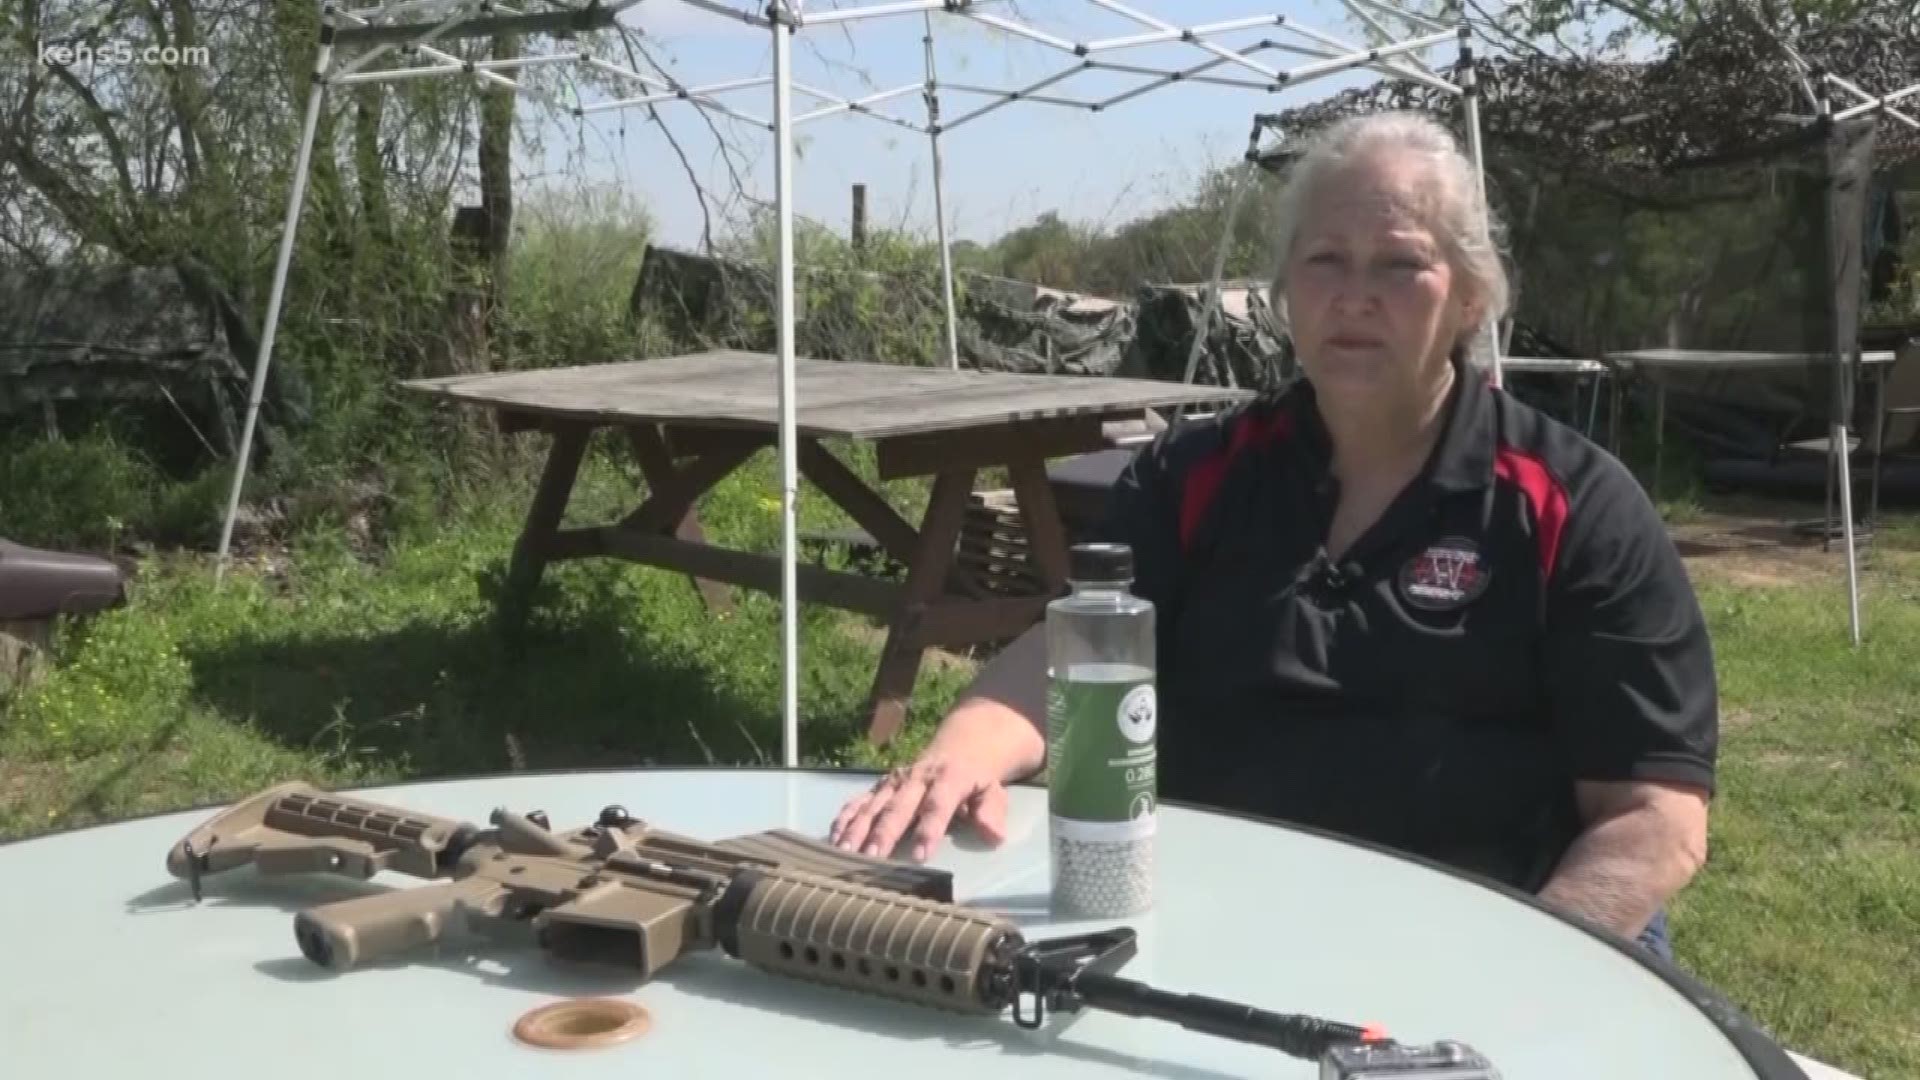 Michelle Howser sees thousands of guns – real and fake – at her airsoft gun range, Mission Airsoft. Despite her familiarity, she never would have thought the Uzi she saw on the news was a non-functional replica. According to police, a woman who was fatally shot by SAPD pulled a the replica on an officer.